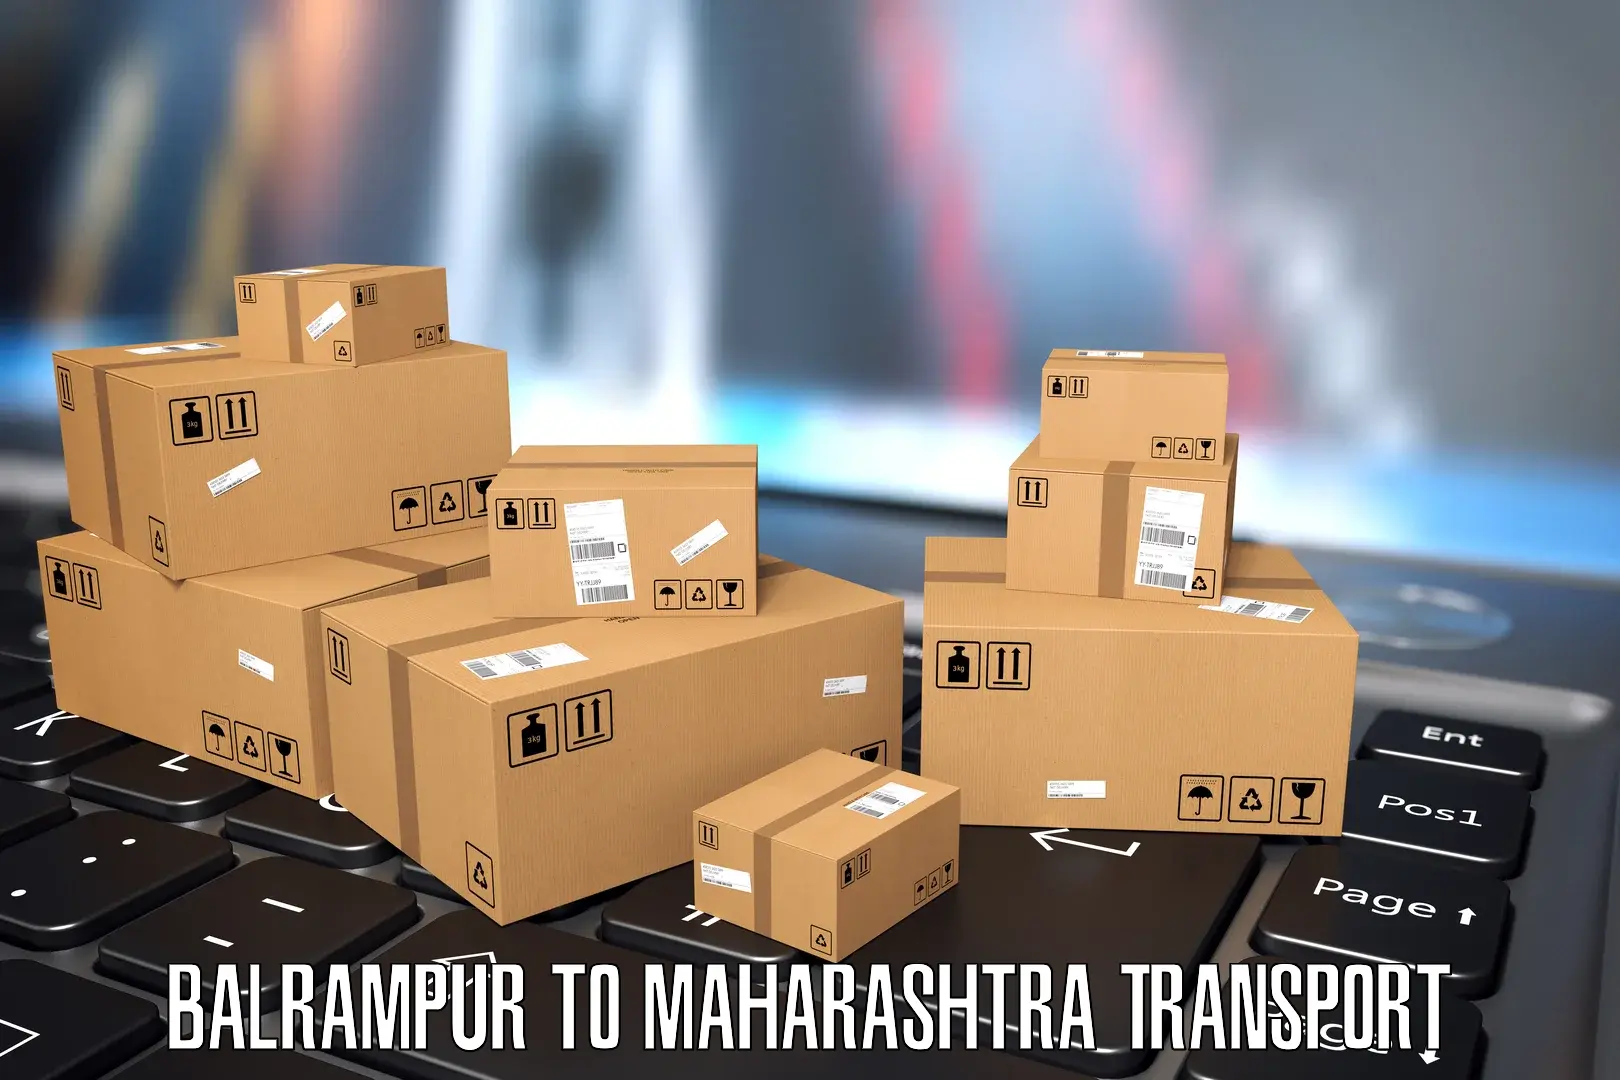 Package delivery services in Balrampur to Nagpur